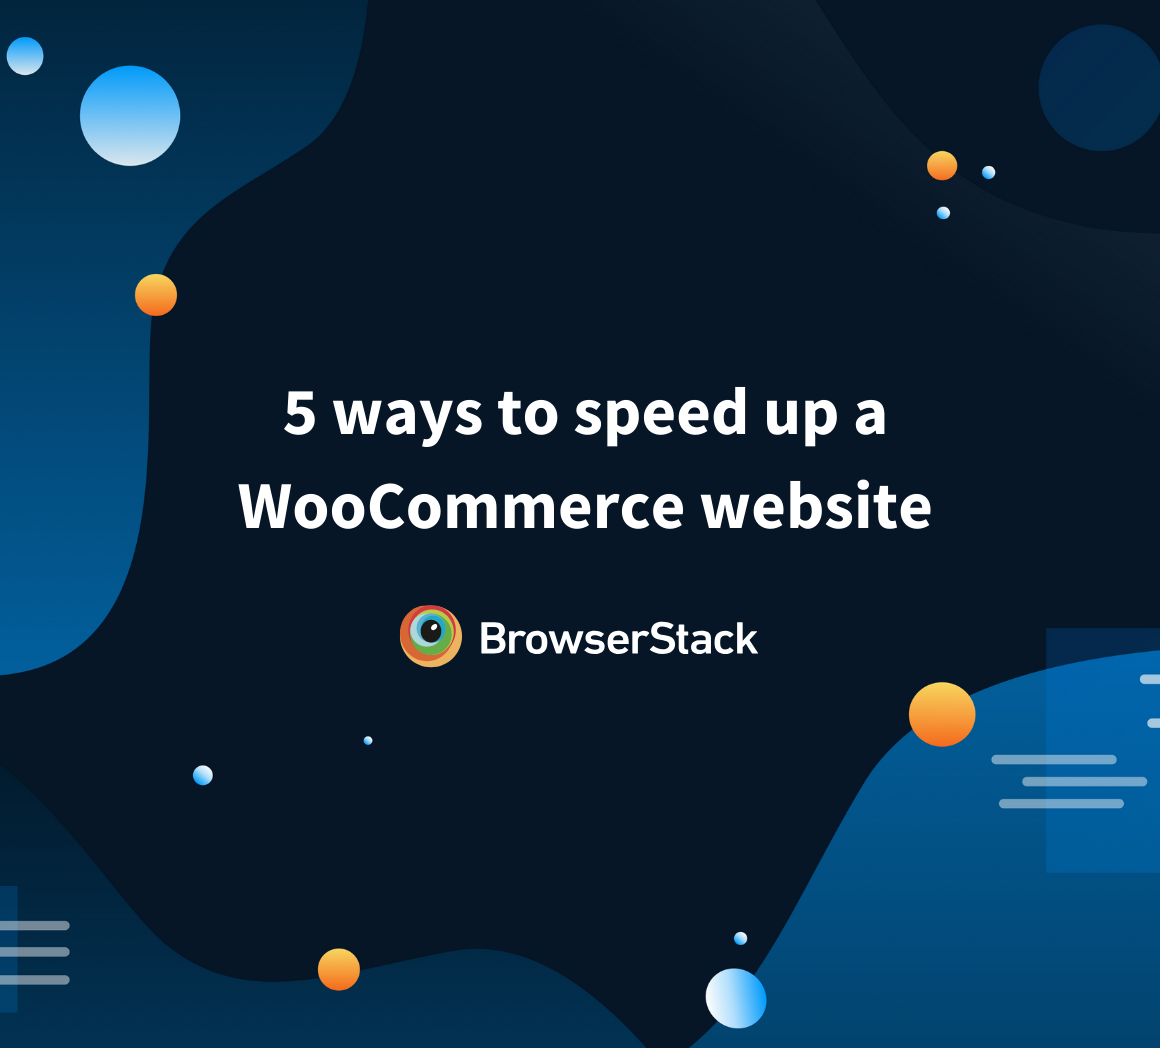 How to speed up a WooCommerce website